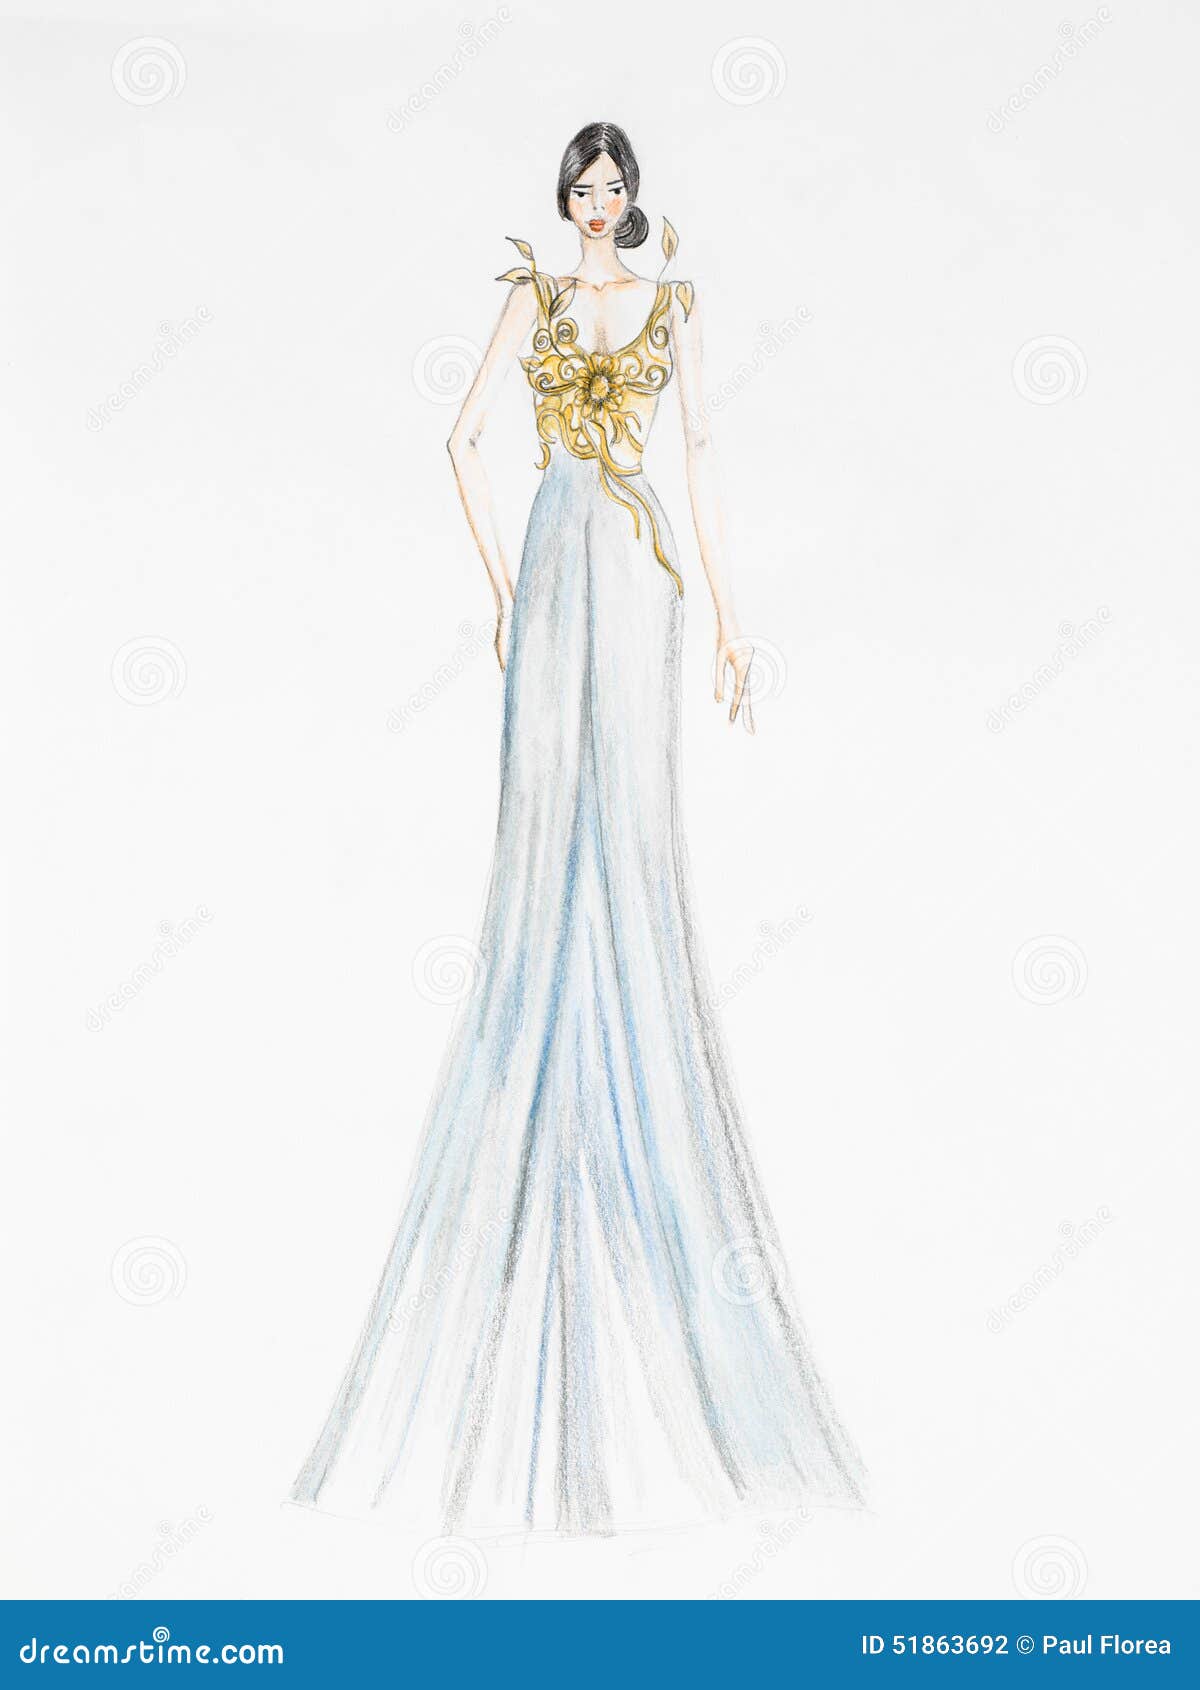 Filipino Designers Sketched Michelle Dee's Miss Universe Gown